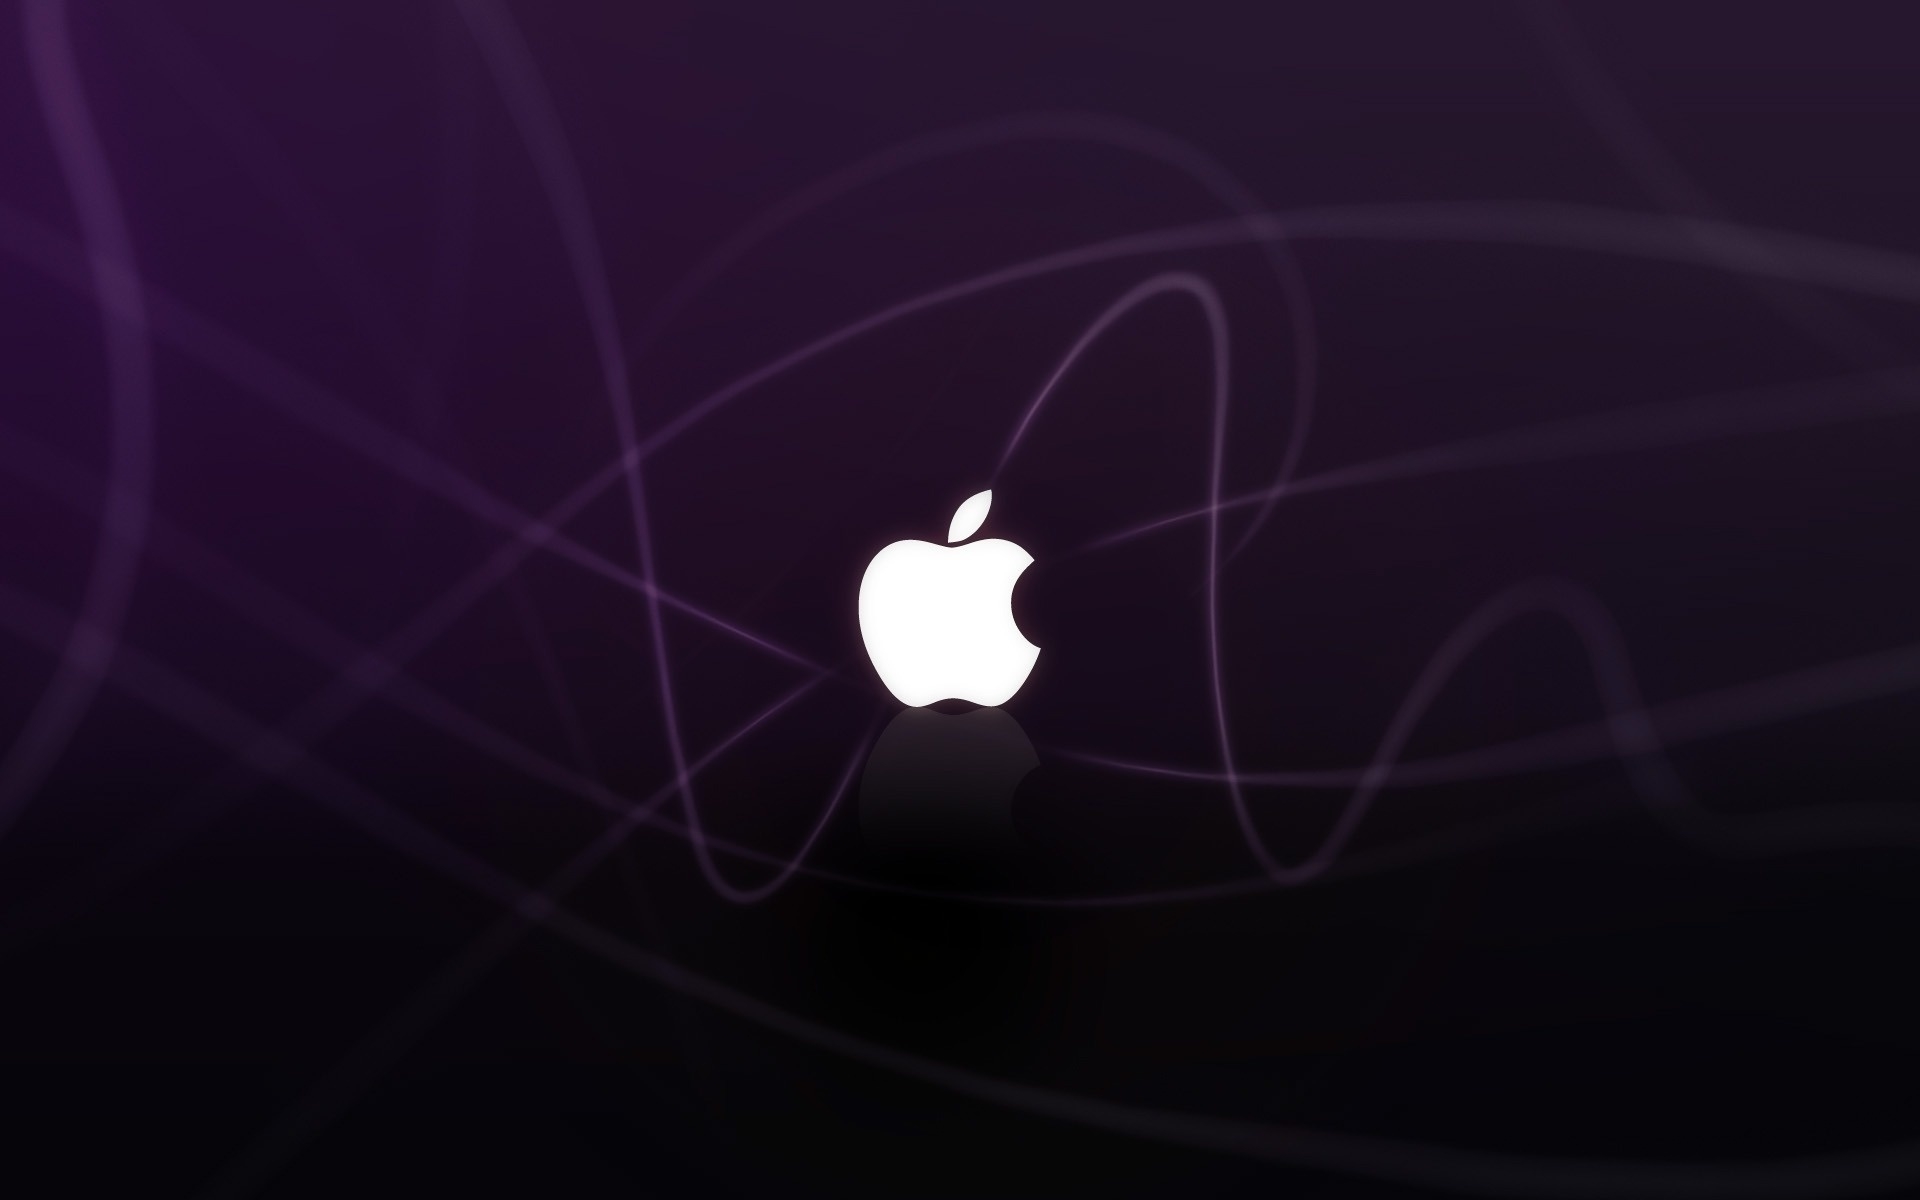 Purple Apple frequency for 1920 x 1200 widescreen resolution